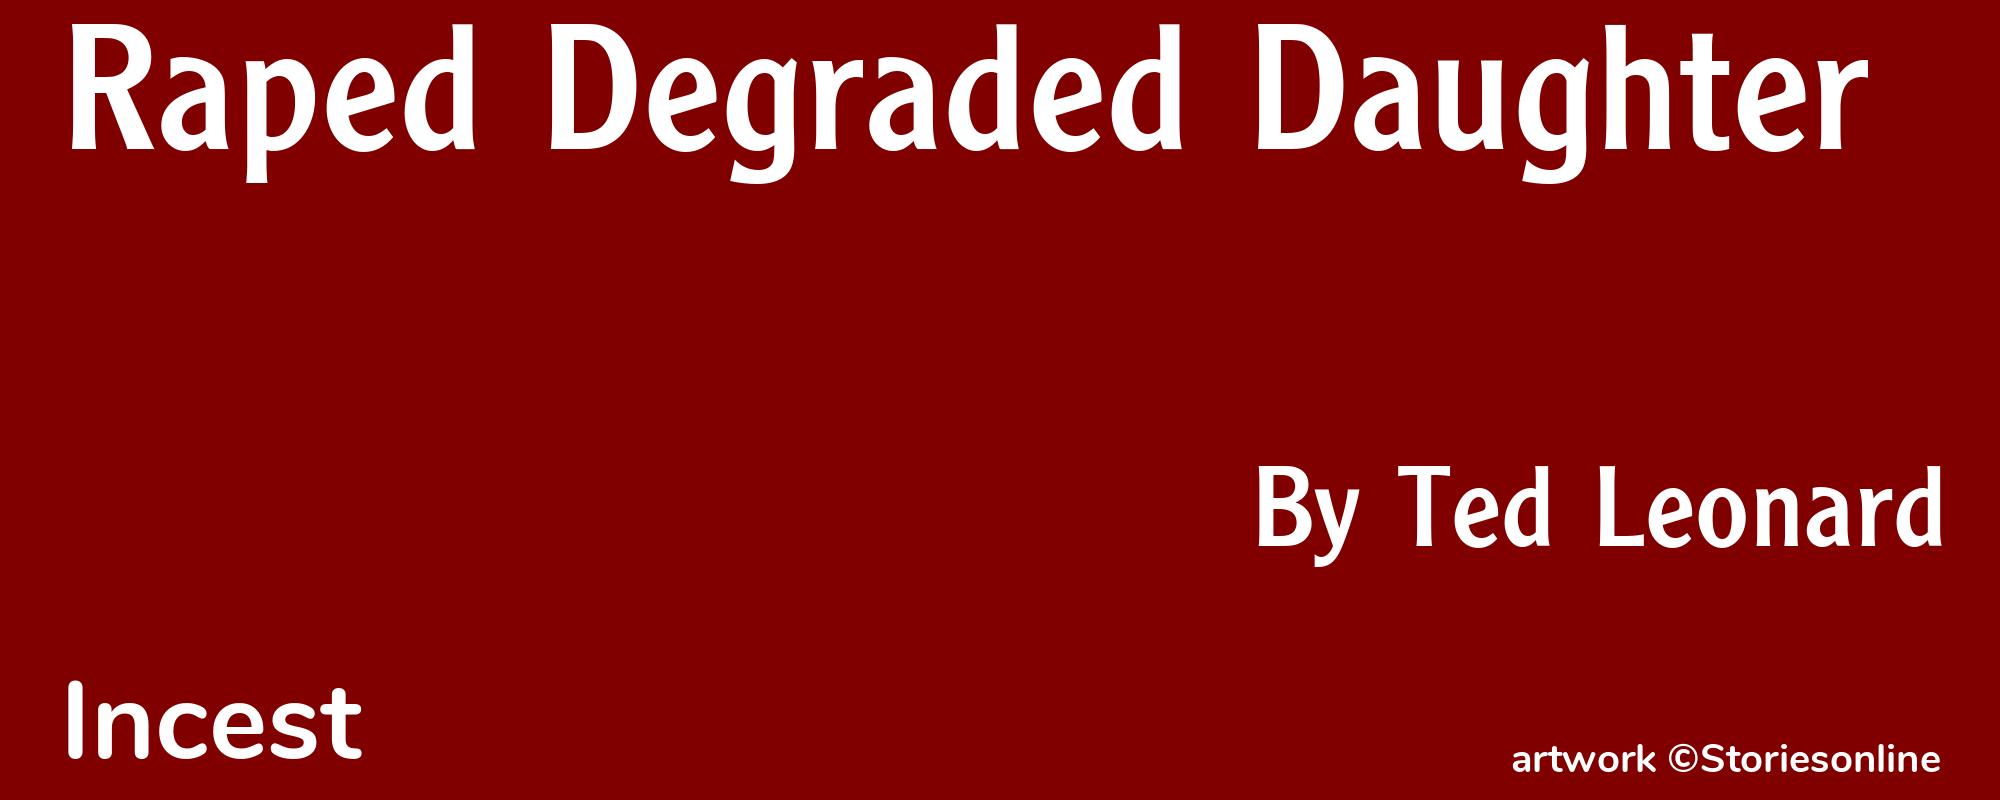 Raped Degraded Daughter - Cover